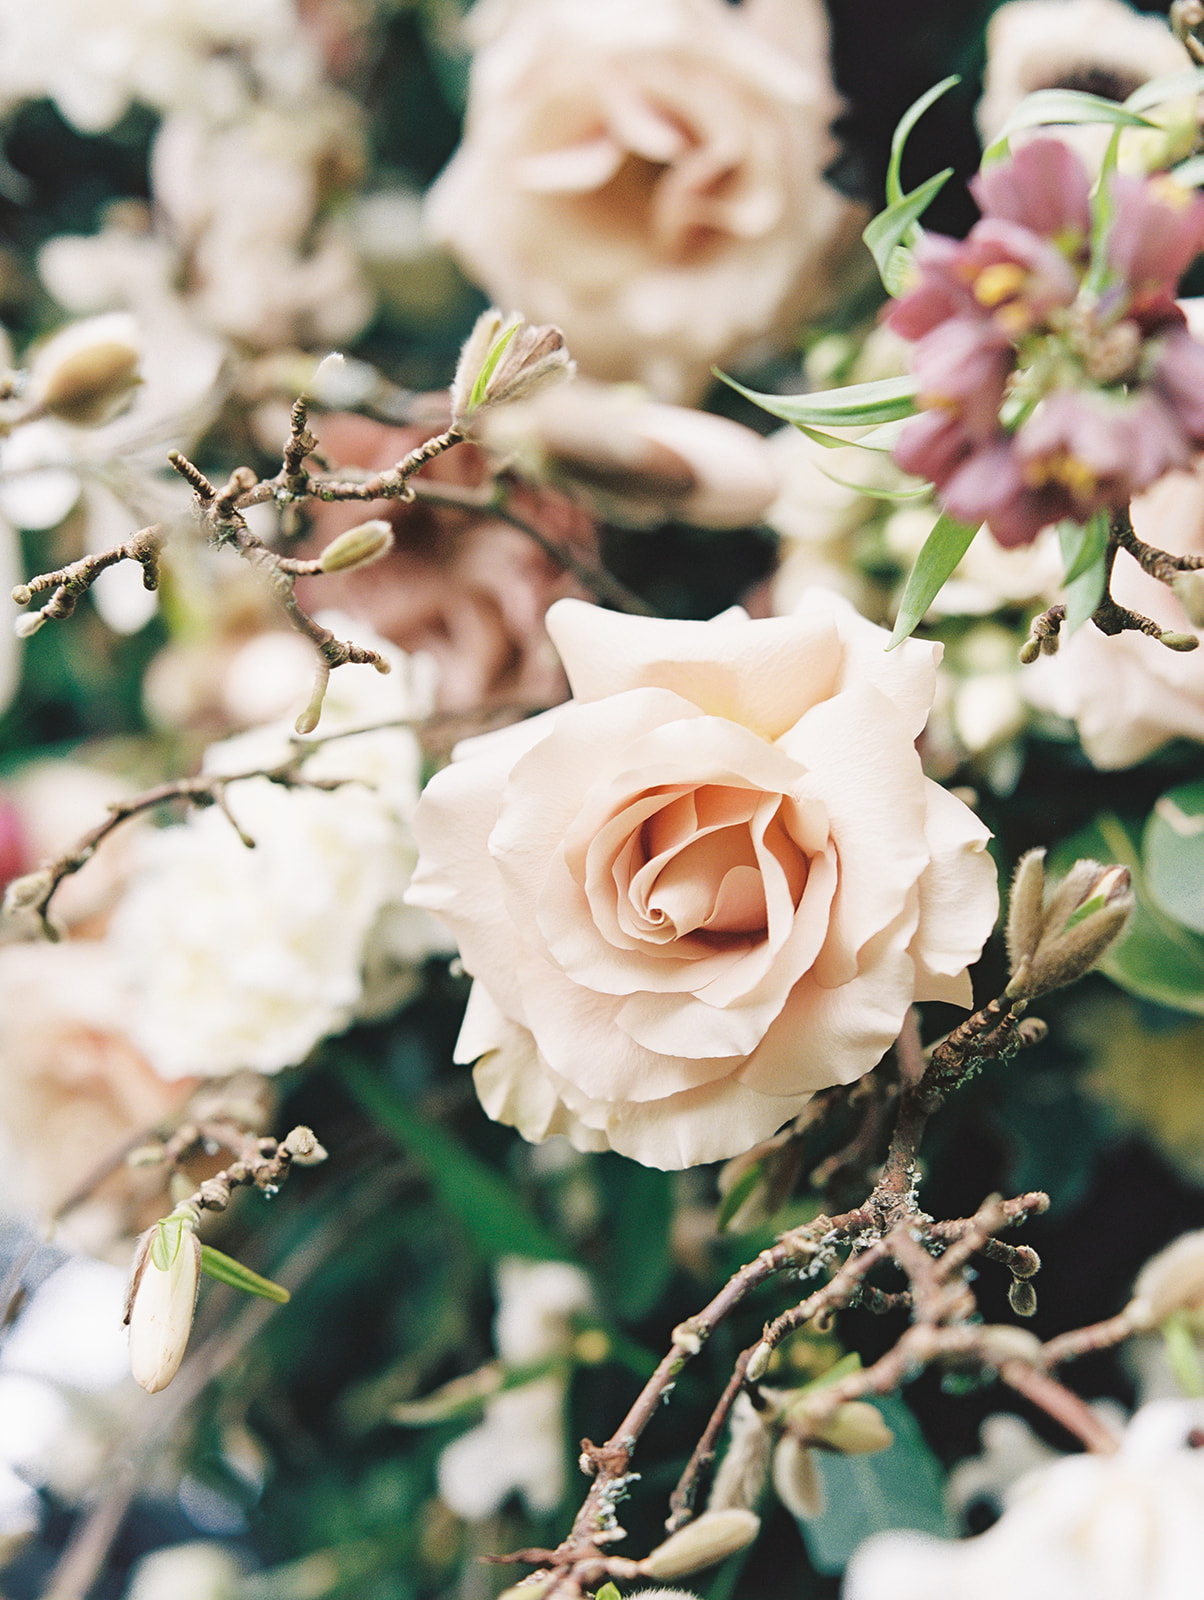 A close up image of a rose amidst blooming branches in the floral hedge